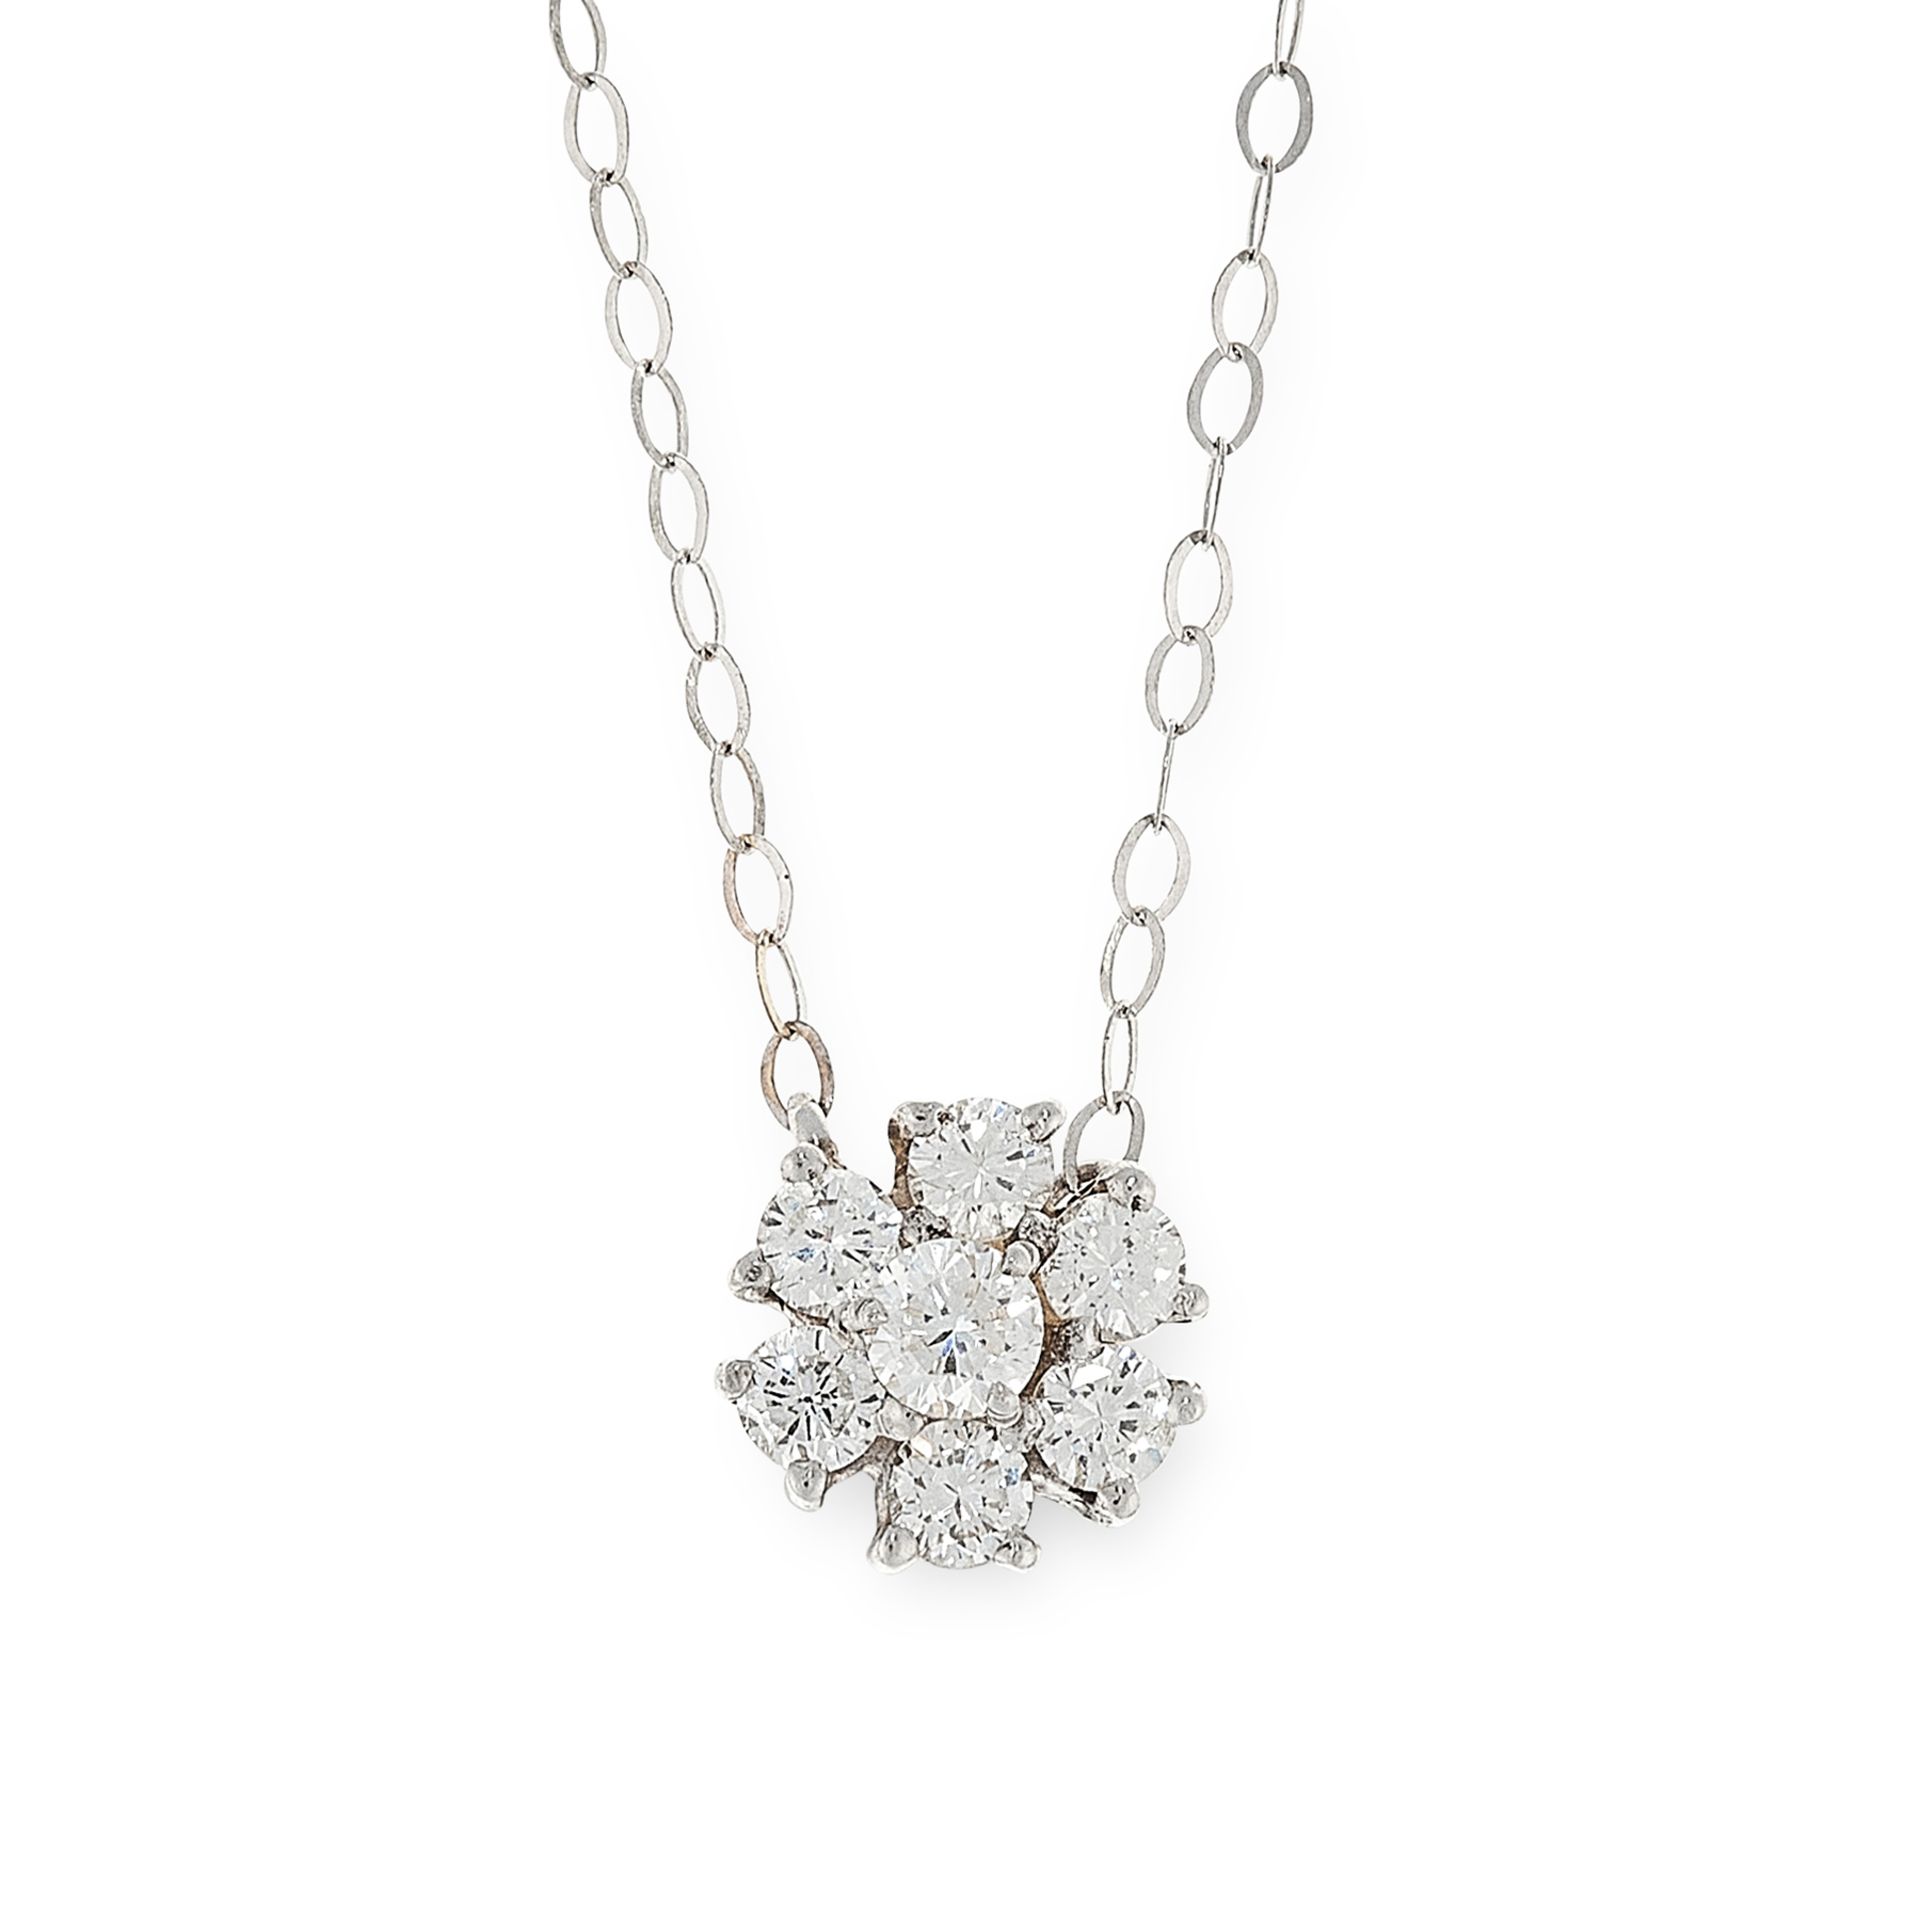 A DIAMOND CLUSTER PENDANT NECKLACE in 18ct white gold, set with a cluster of seven round cut